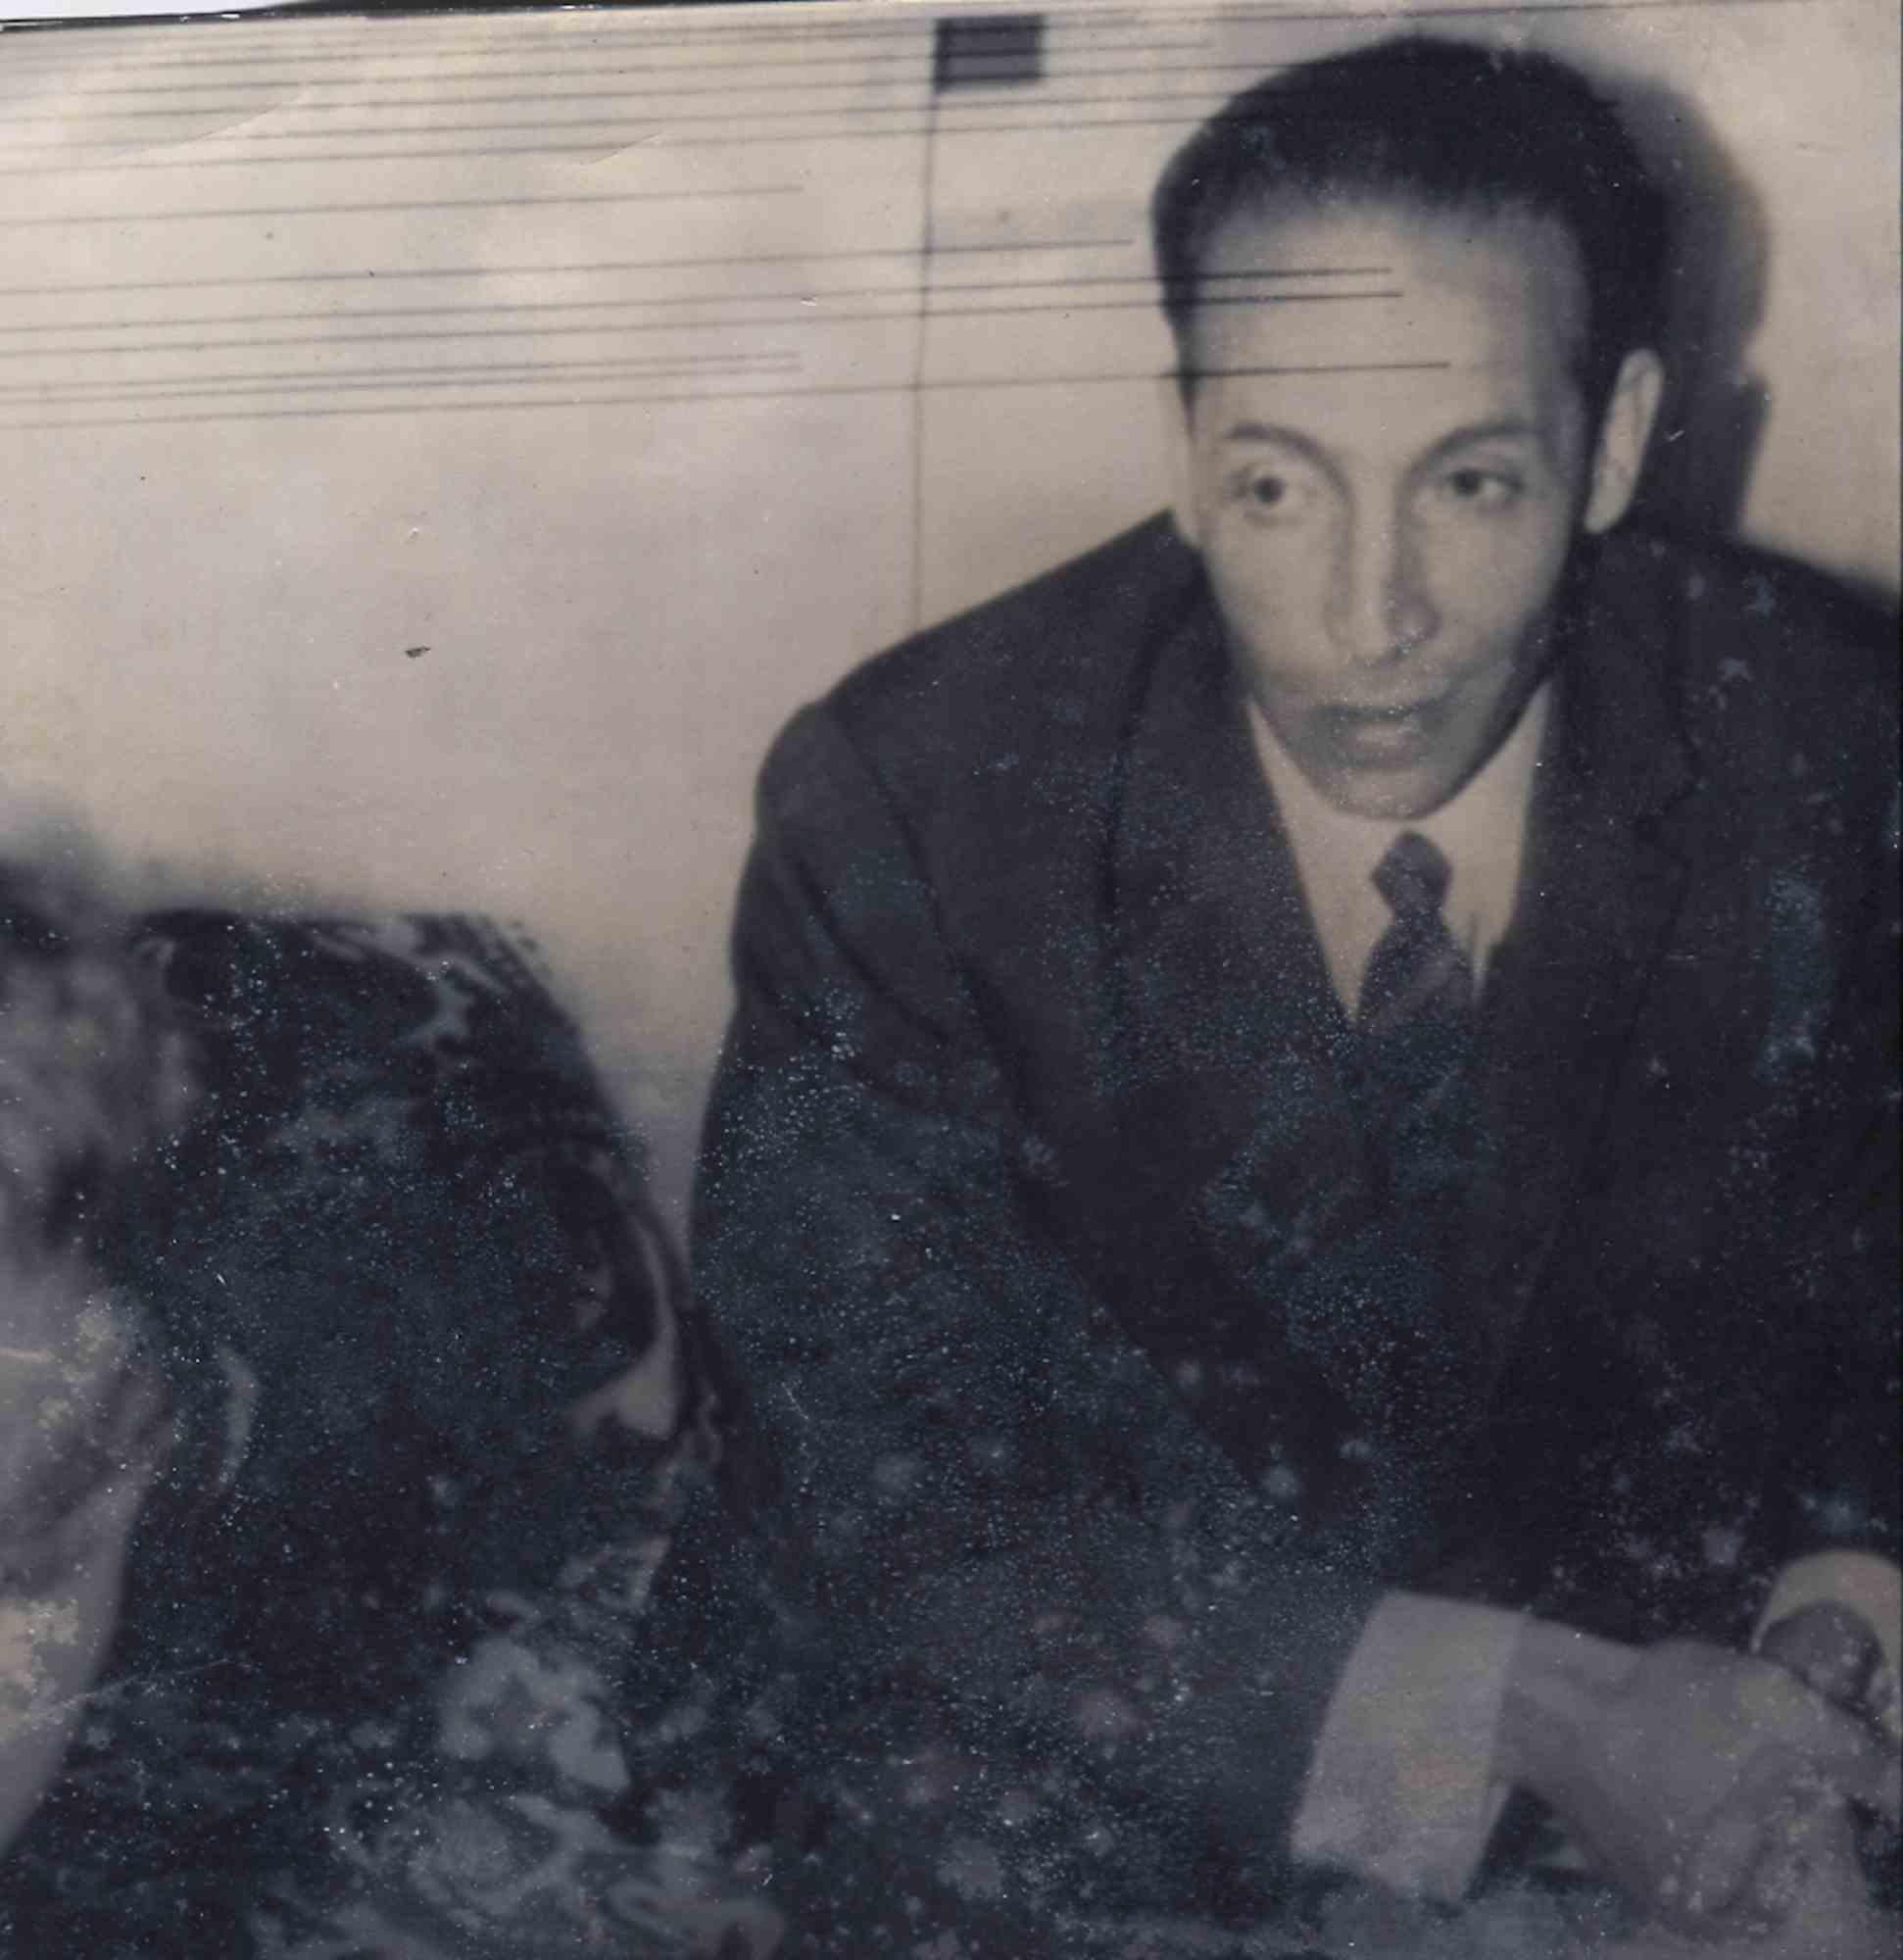 Unknown Figurative Photograph - Historical Photo - Mohamad Buolieg - Vintage photo - mid-20th Century